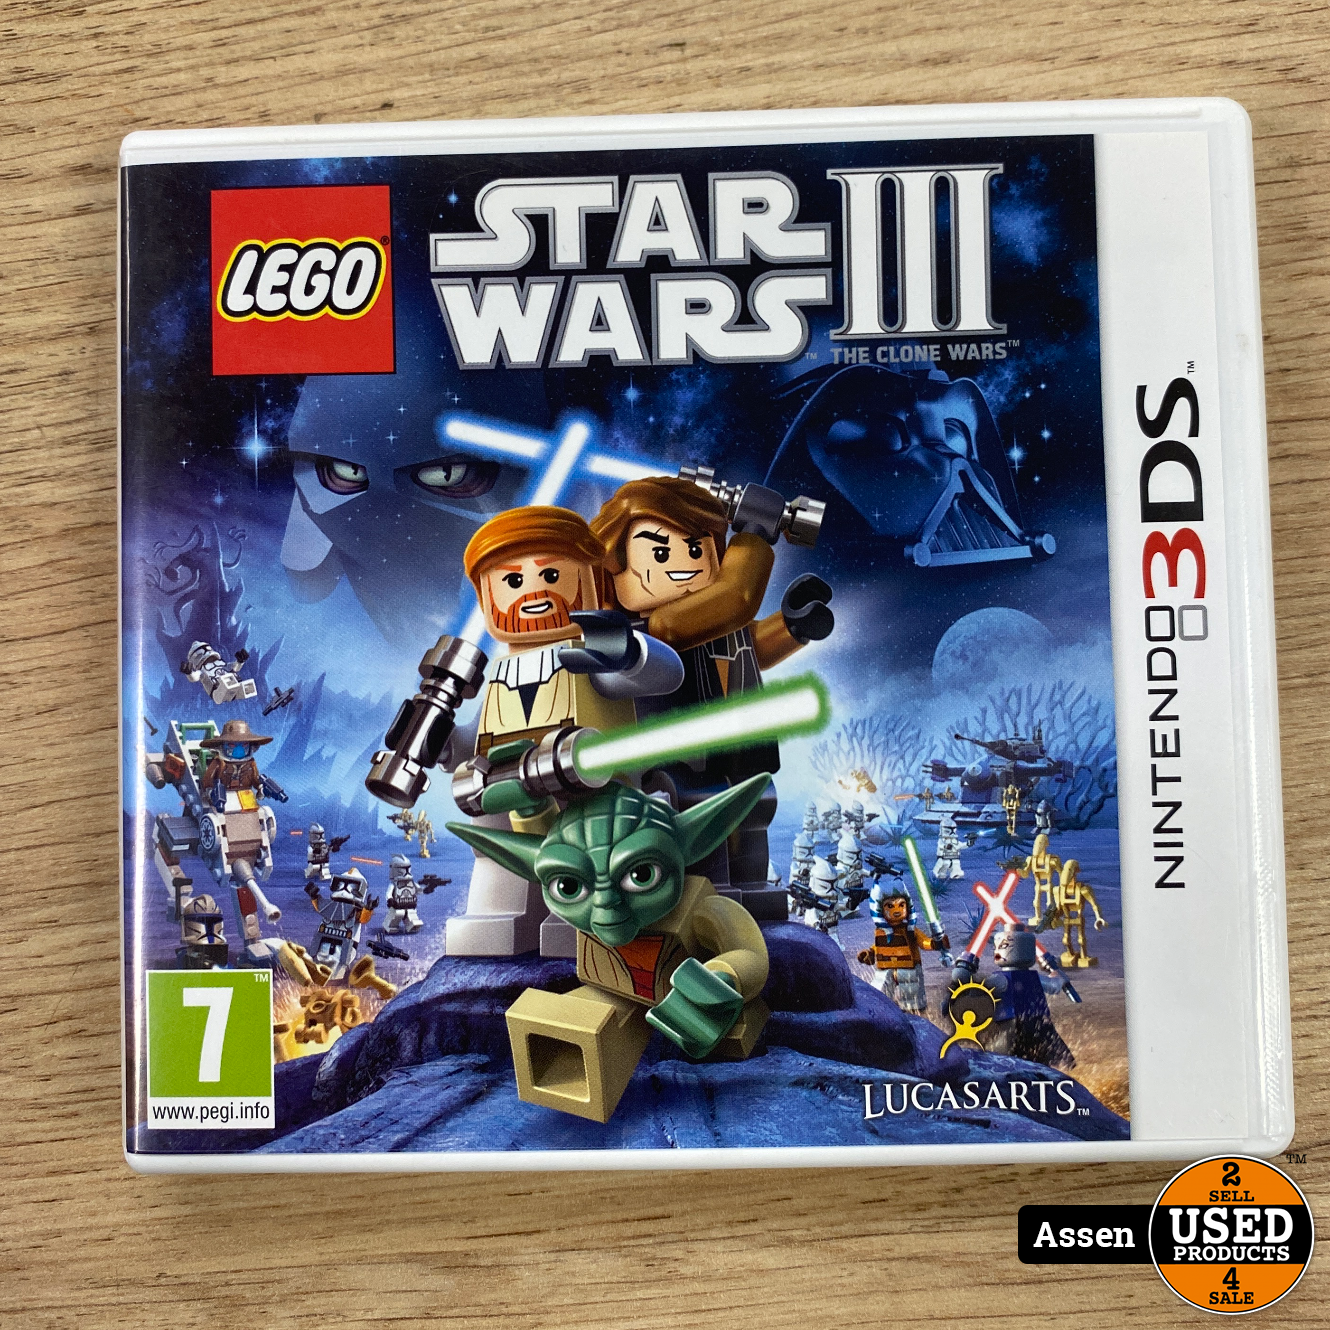 Star Wars III || 3DS Game - Used Products